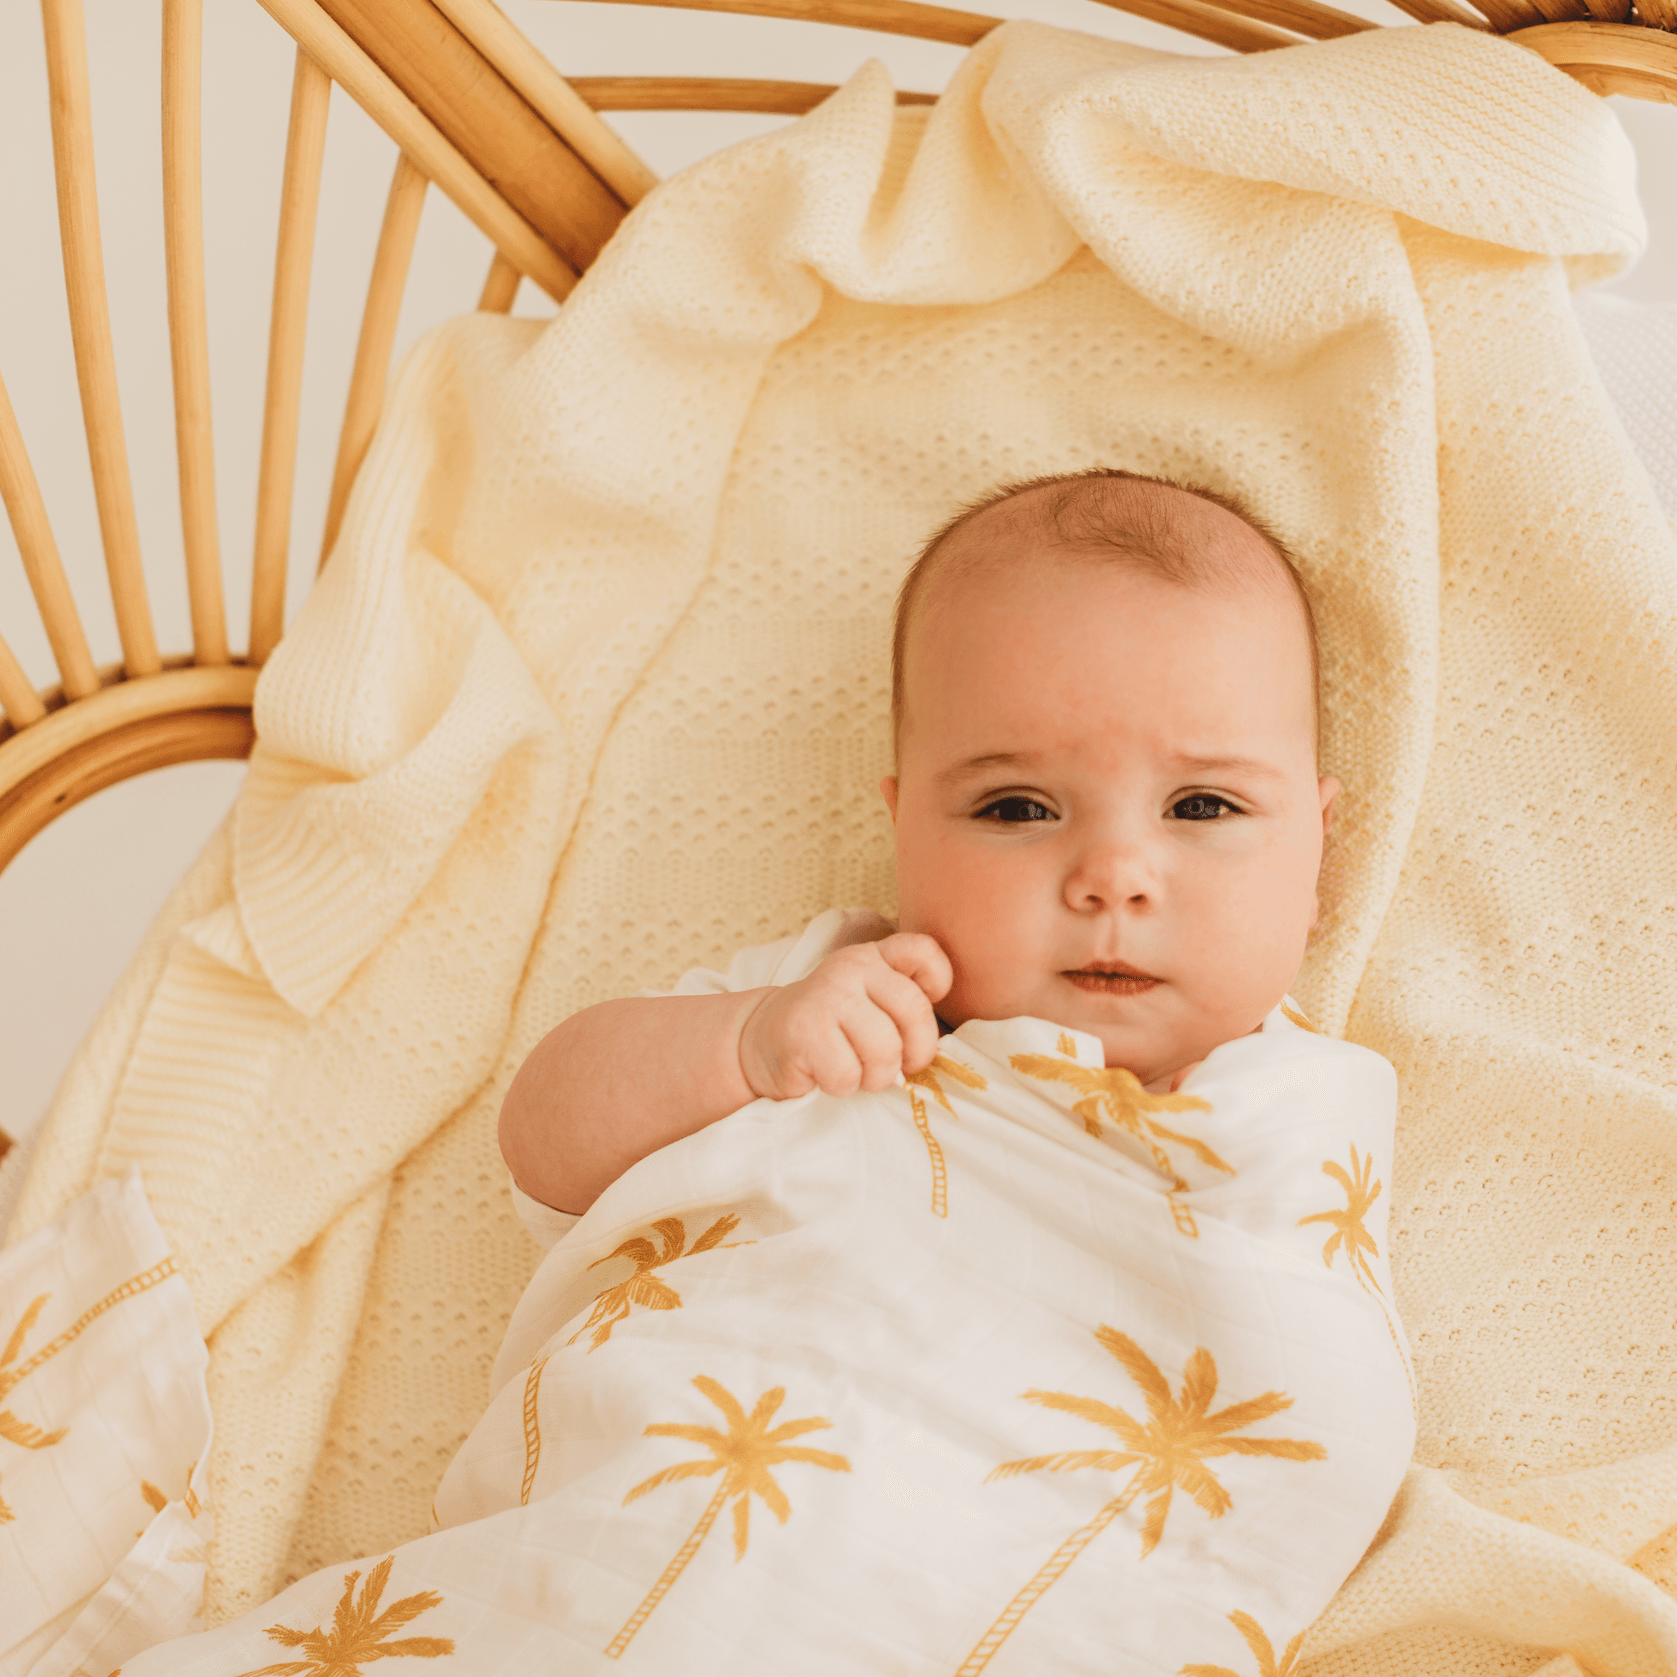 Palm Swaddle - Luca and Co Collective